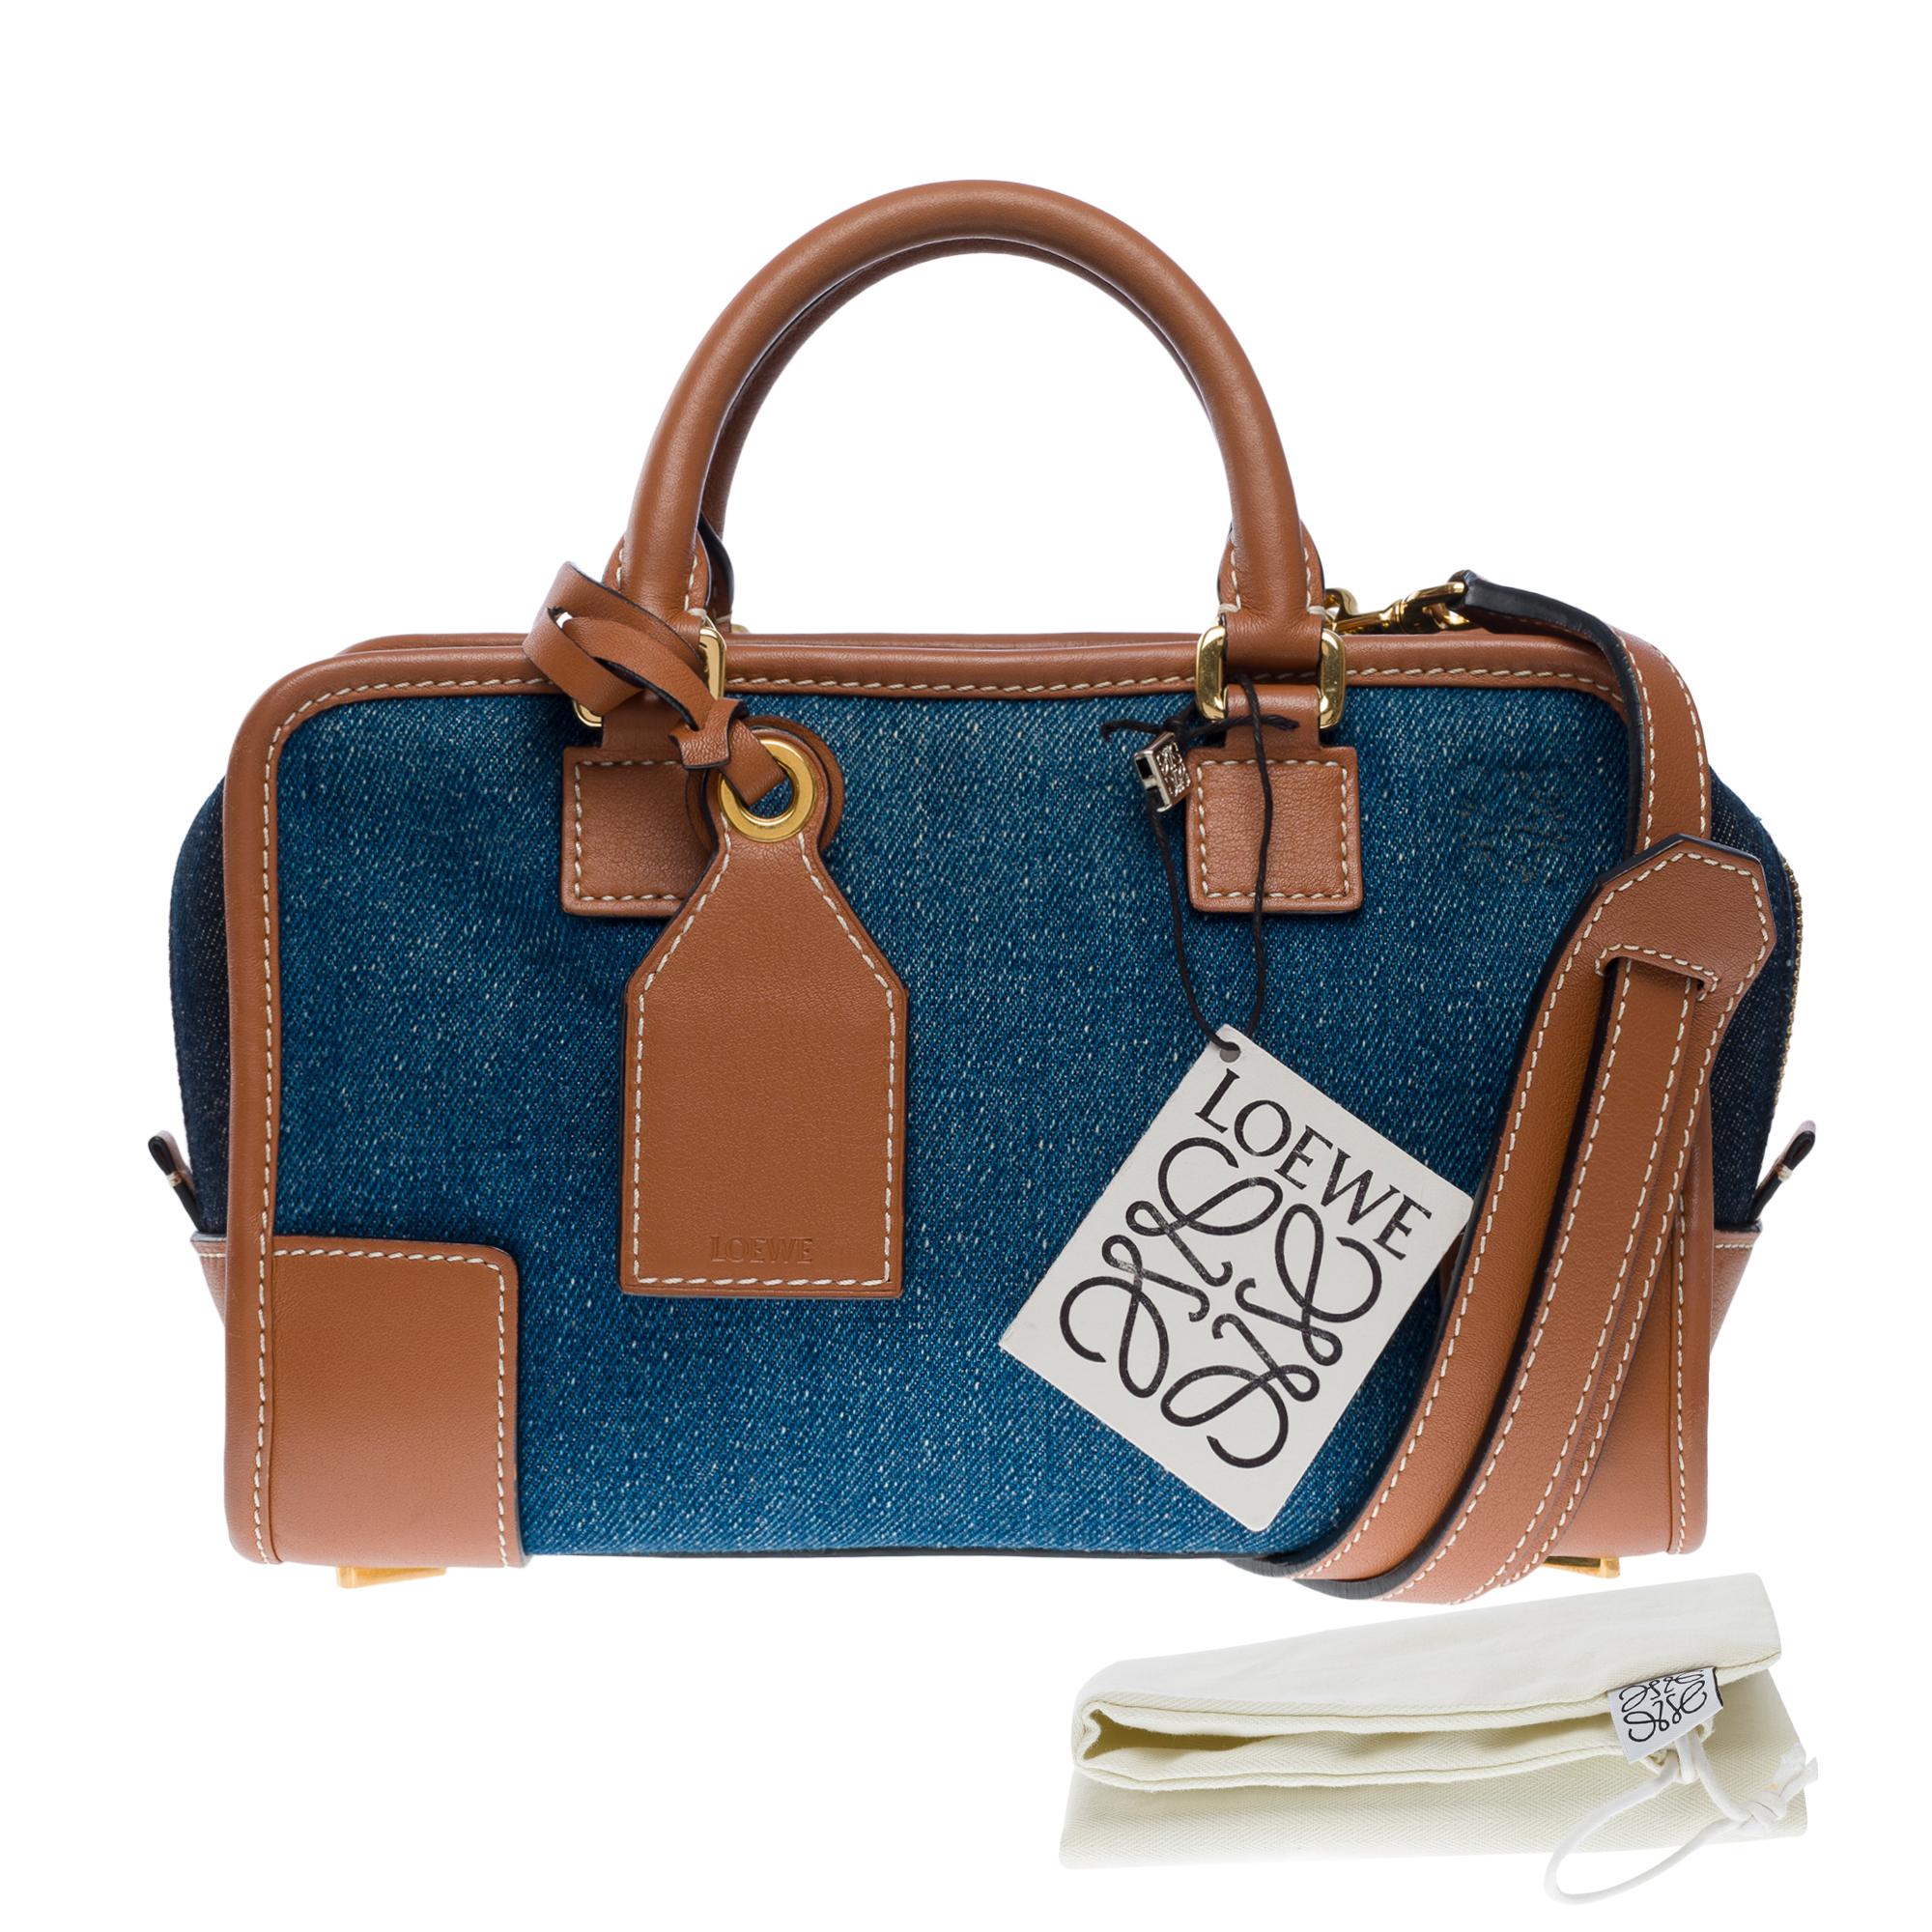 Amazing​ ​Loewe​ ​Amazona​ ​23​ ​2​ ​Way​ ​handbag​ ​strap​ ​in​ ​blue​ ​denim​ ​and​ ​brown​ ​calf​ ​leather,​ ​removable​ ​and​ ​adjustable​ ​brown​ ​leather​ ​shoulder​ ​strap,​ ​golden​ ​metal​ ​trim,​ ​double​ ​brown​ ​leather​ ​handle​ ​for​